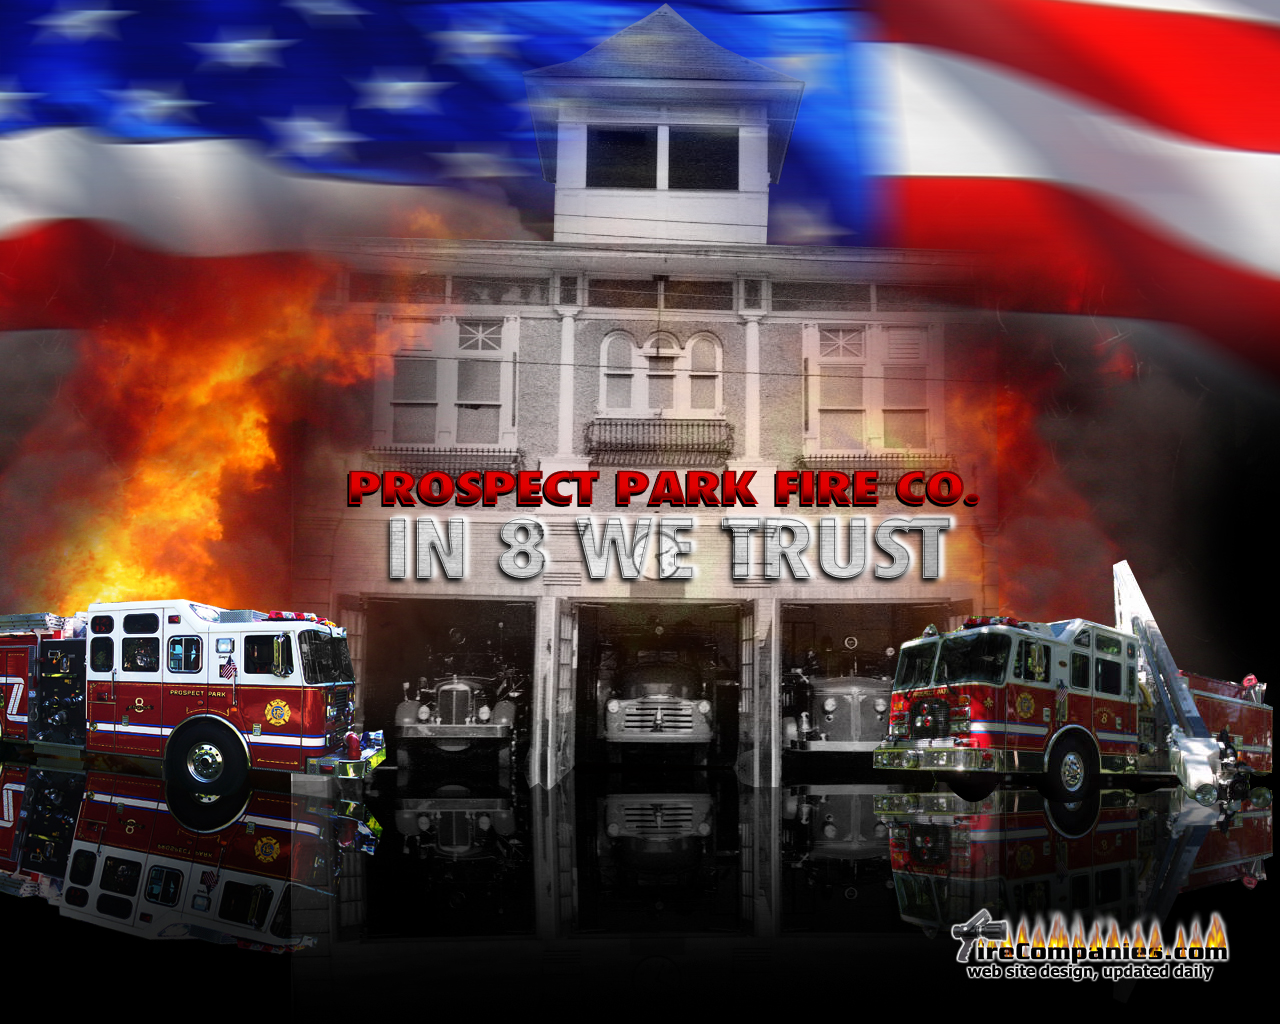 Welcome to Prospect Park Fire Co.